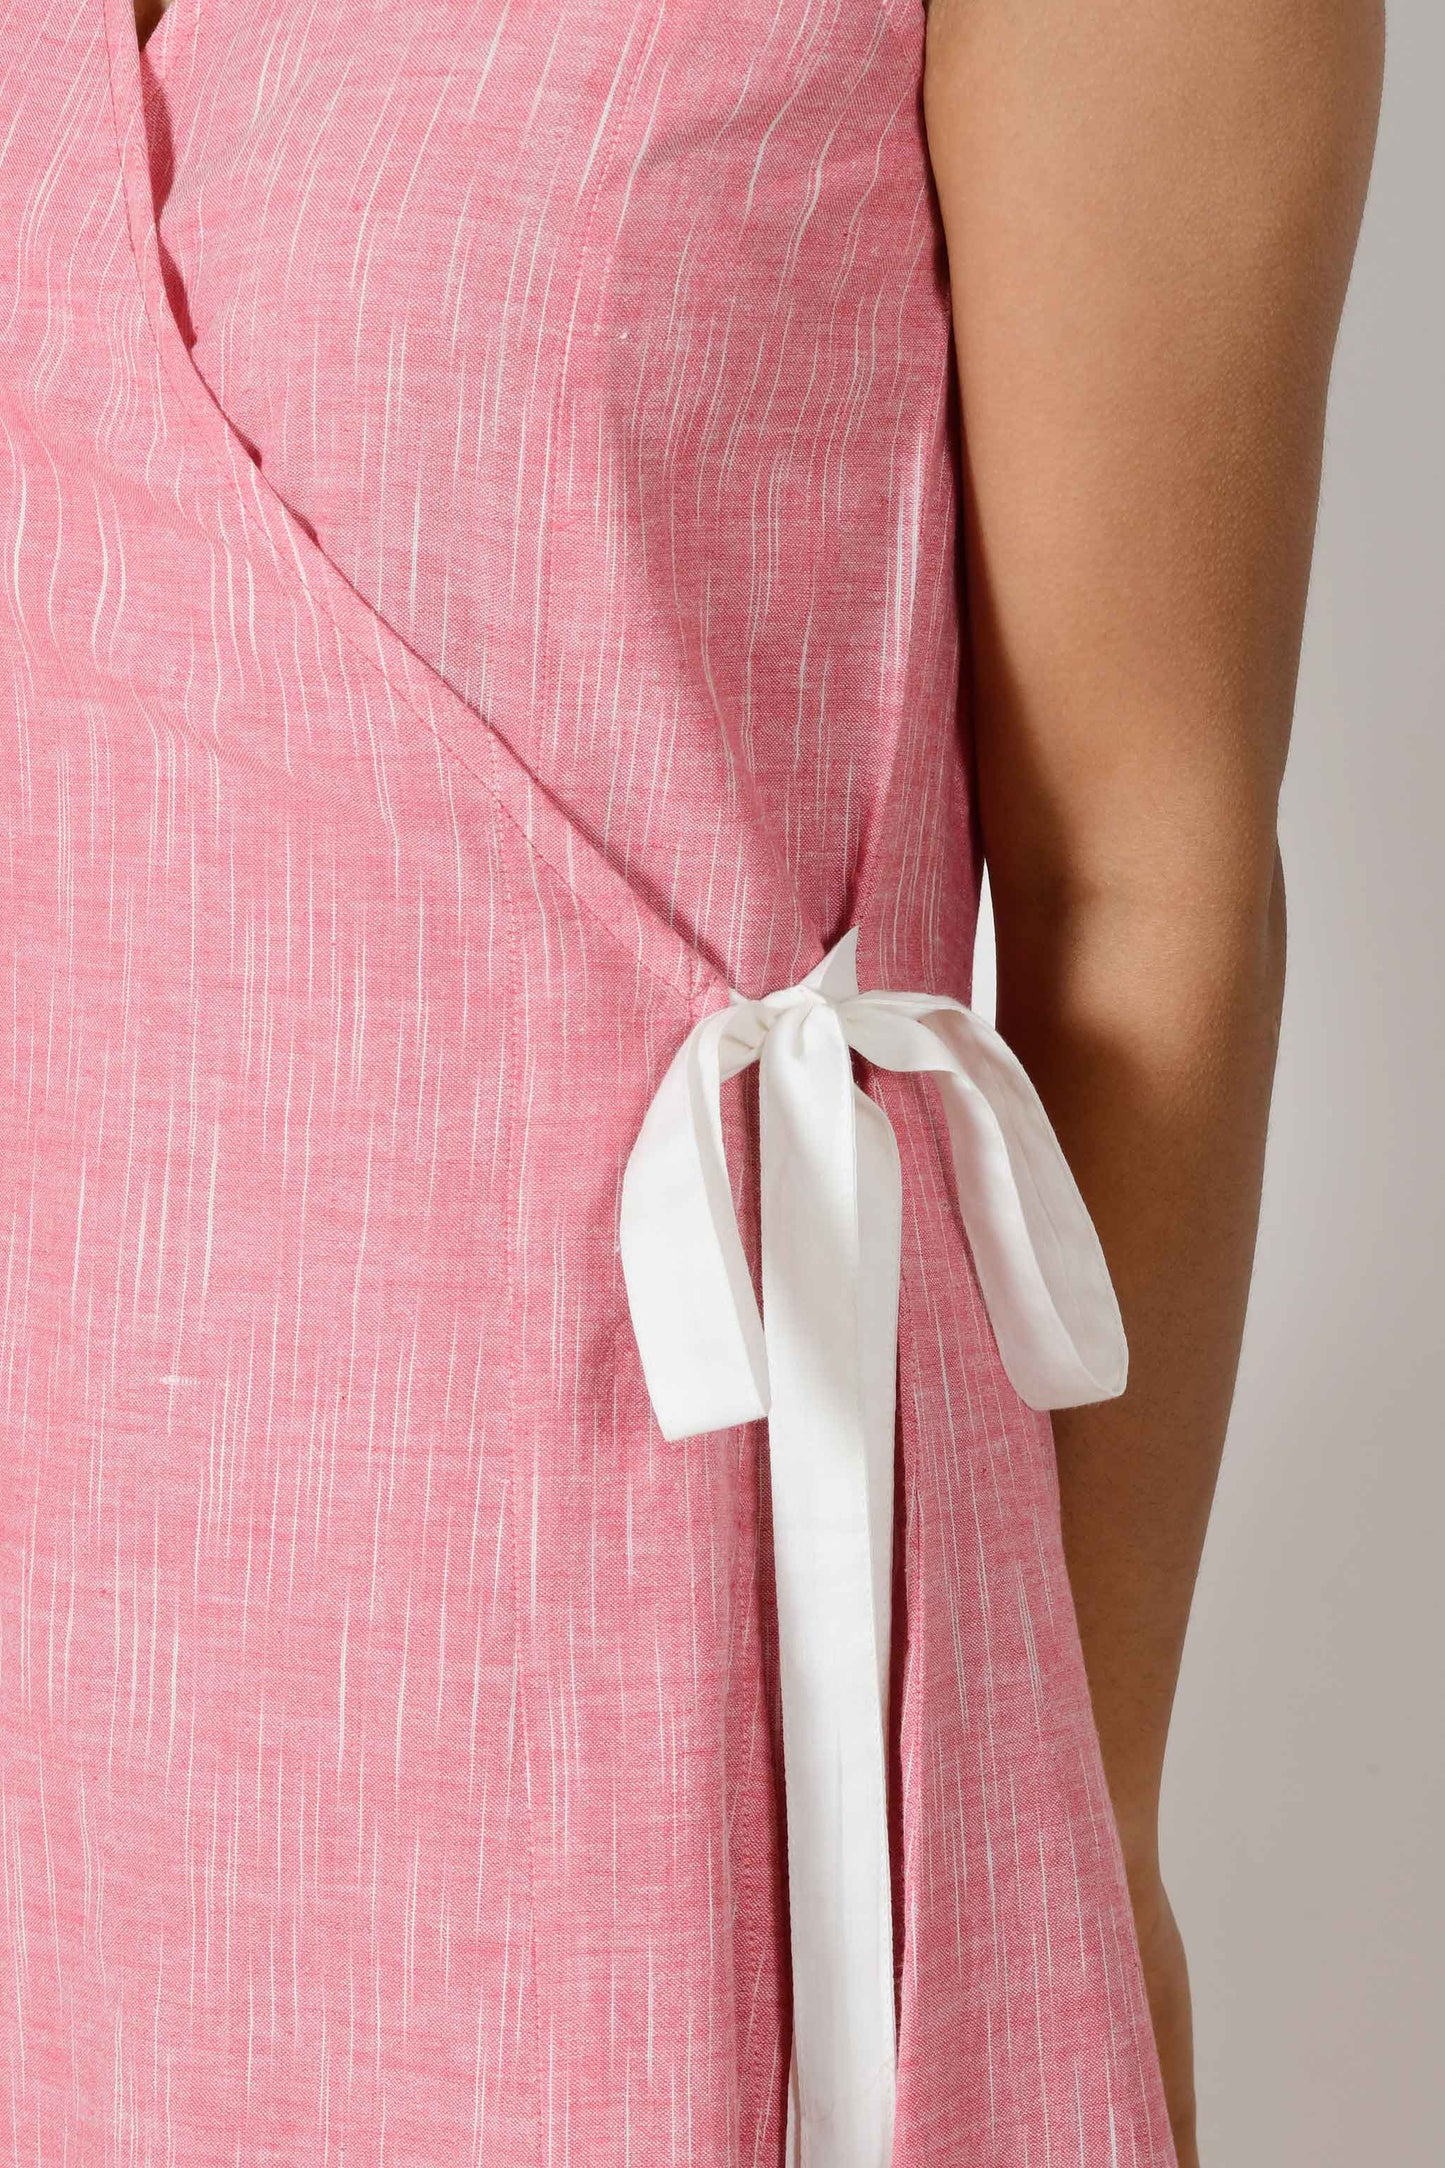 Close up of a detail on a pink dress.